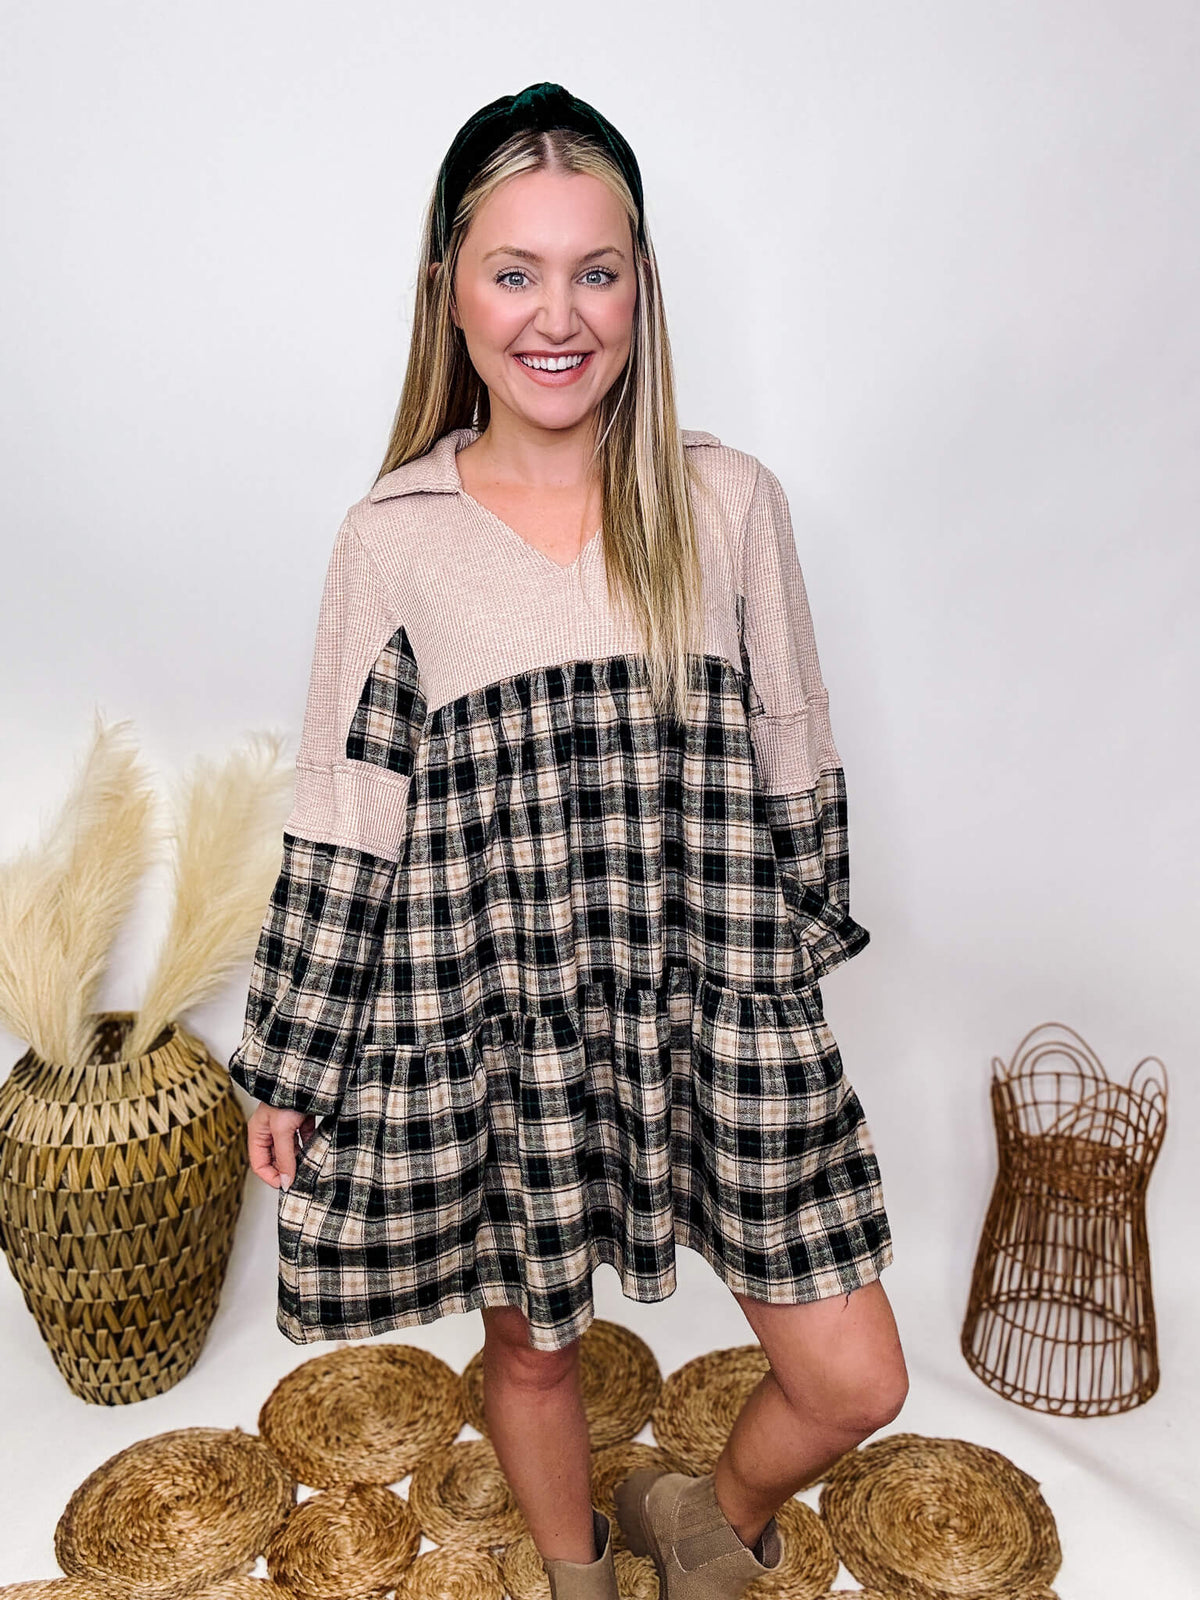 Fantastic Fawn Black, Tan, Cream, Hunter Green Plaid Waffle Thermal Contrast Details Tiered Babydoll Dress Side Pockets Flowy Relaxed Fit Self: 50% Rayon 40% Nylon 10% Polyester Cont: 100% Cotton